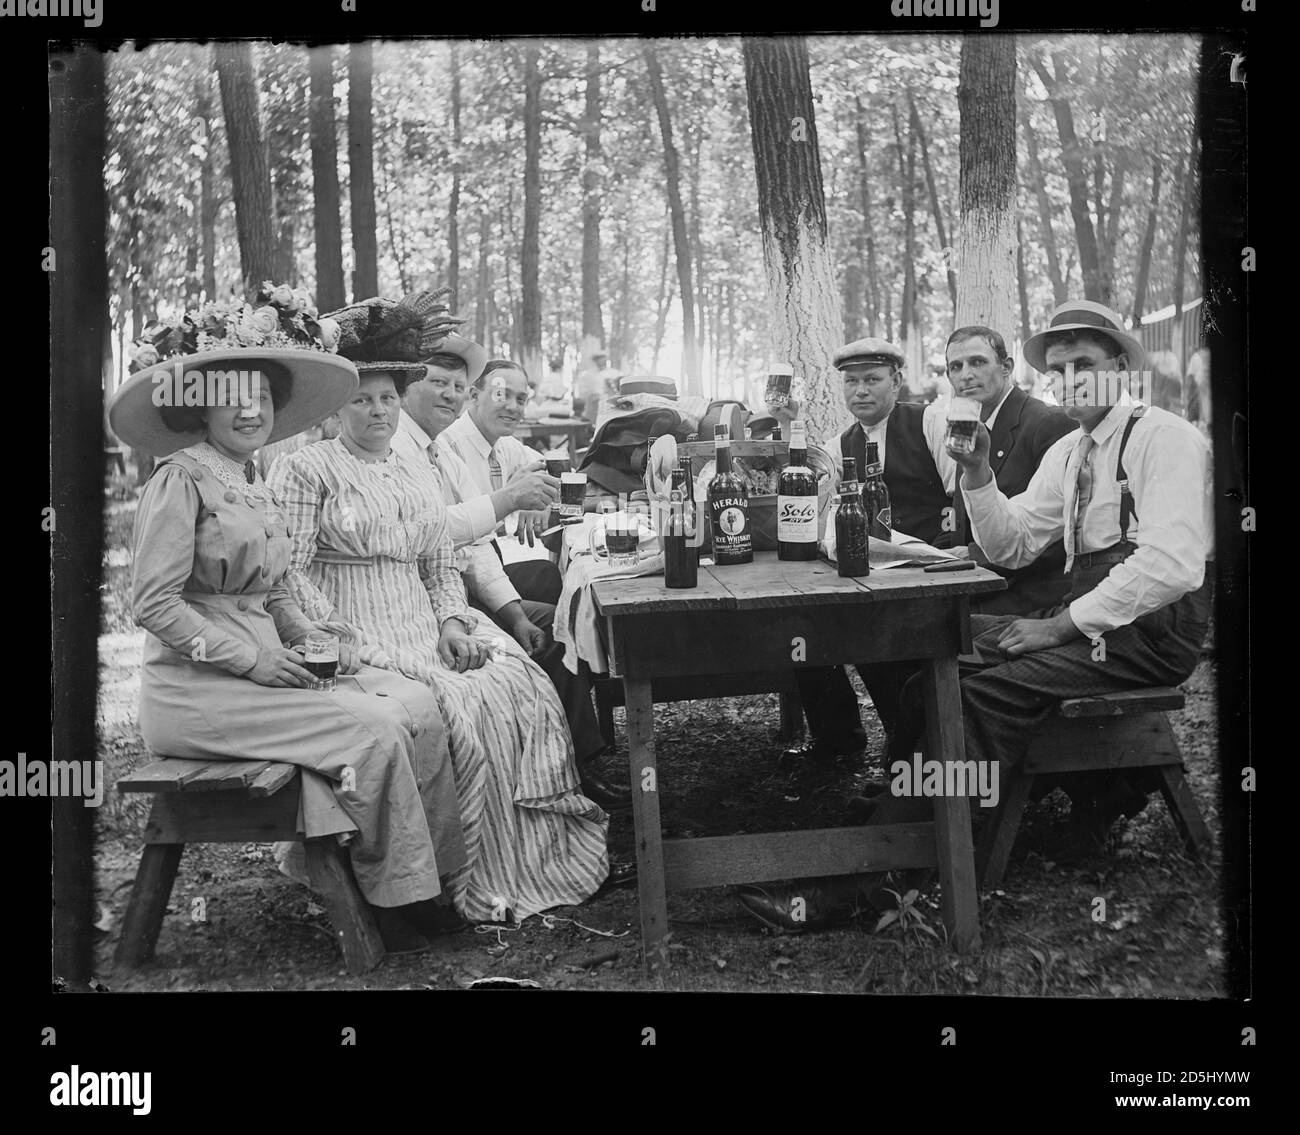 Men and women having a picnic and drinking alchohol in South Chicago, Chicago, Illinois, circa 1910. Stock Photo